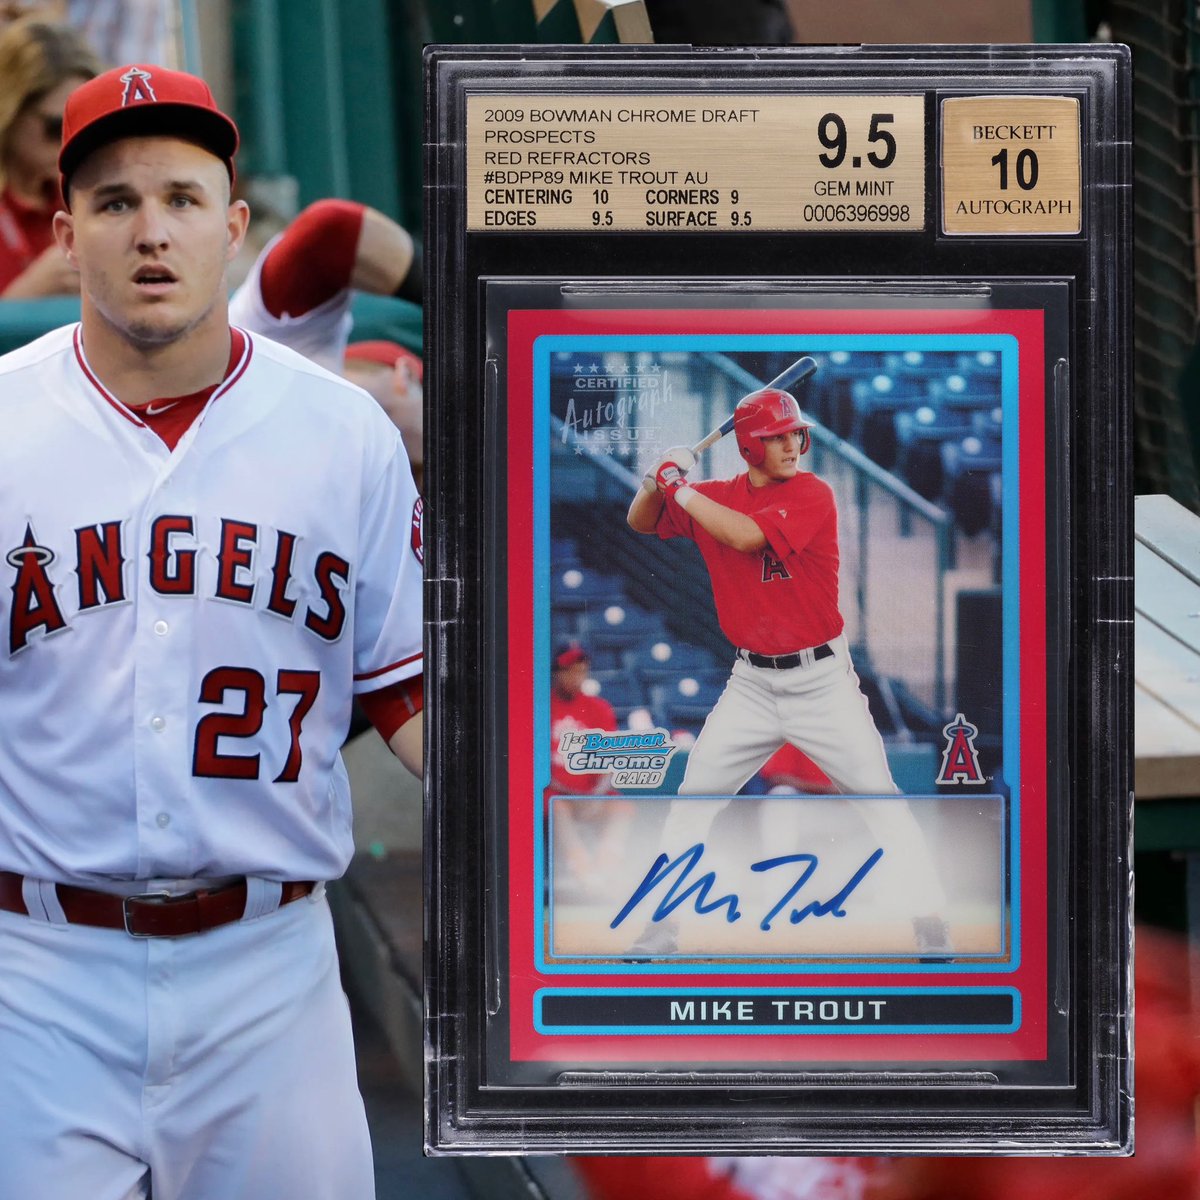 📉 MASSIVE LOSS 📉 One of the BEST Mike Trout cards in existence just sold for a MASSIVE loss… Bought (10/21/22): $1,080,000 Sold (Yesterday): $216,000 Hold Time: 1.5 years Profit: -$864,000 (-80.00%) What will it take for the Mike Trout market to turn around??